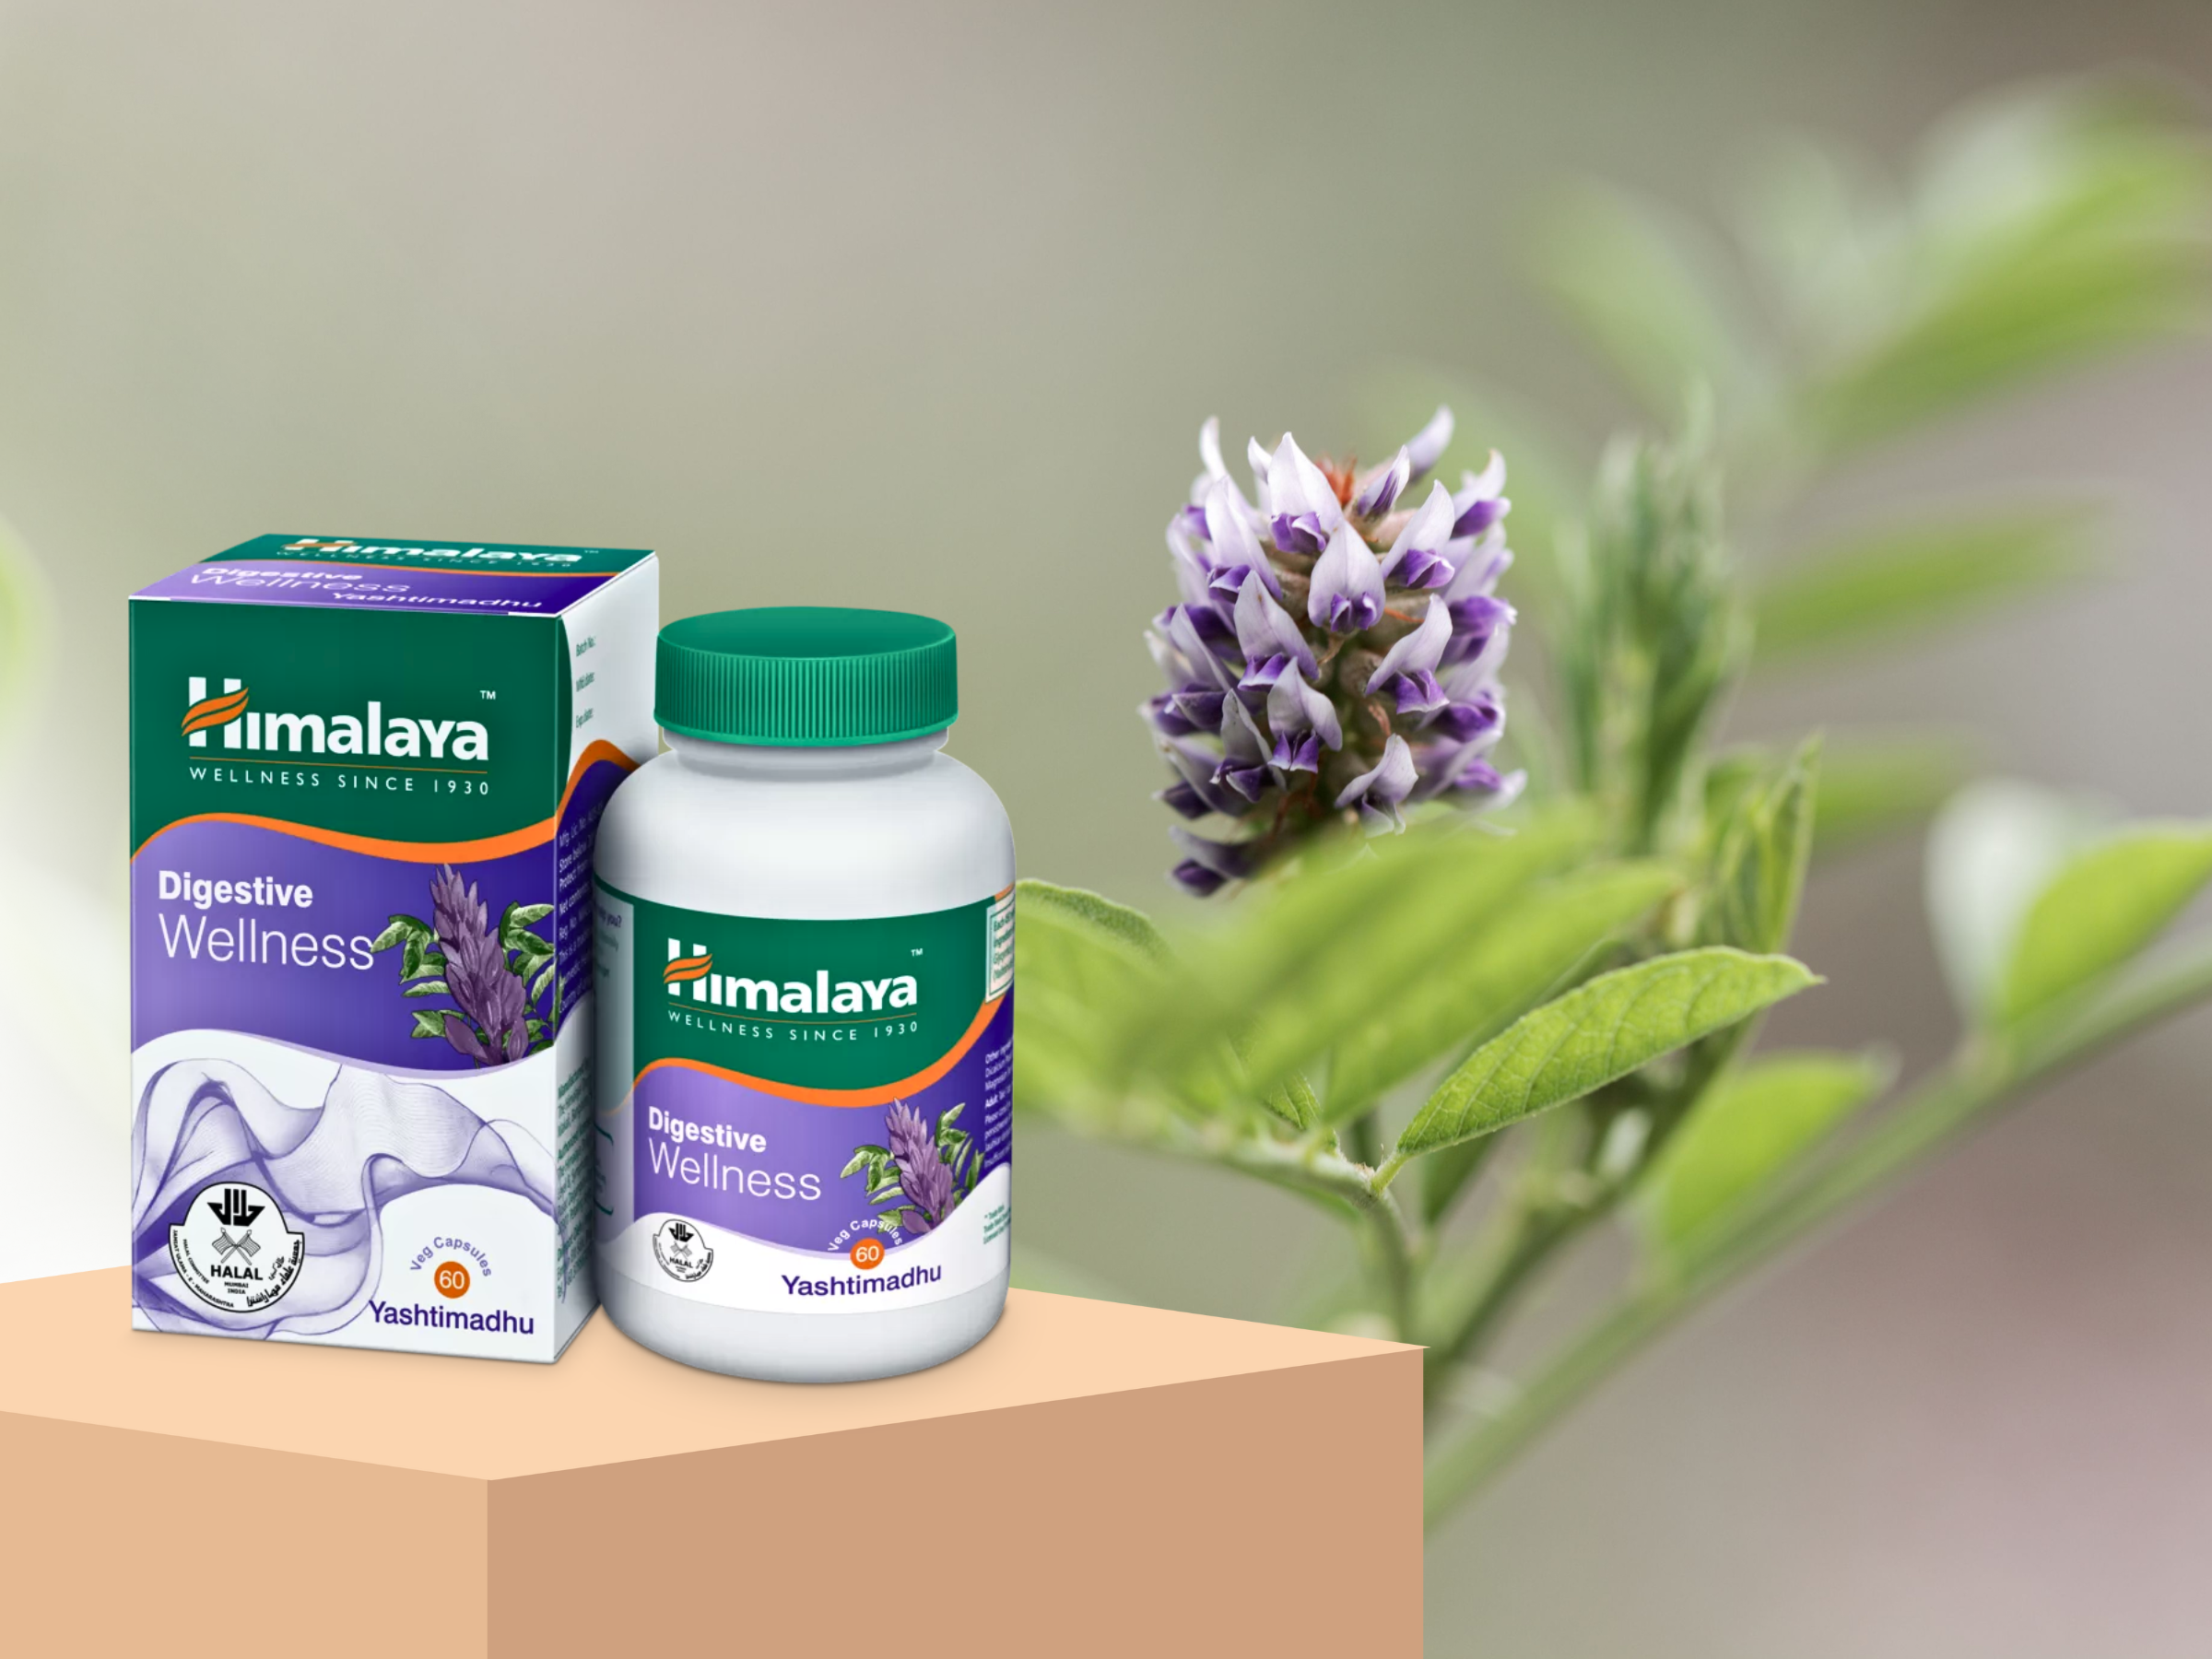 Himalaya Digestive Wellness on product display stand at bottom left, with licorice plant (key ingredient in the product) in the background